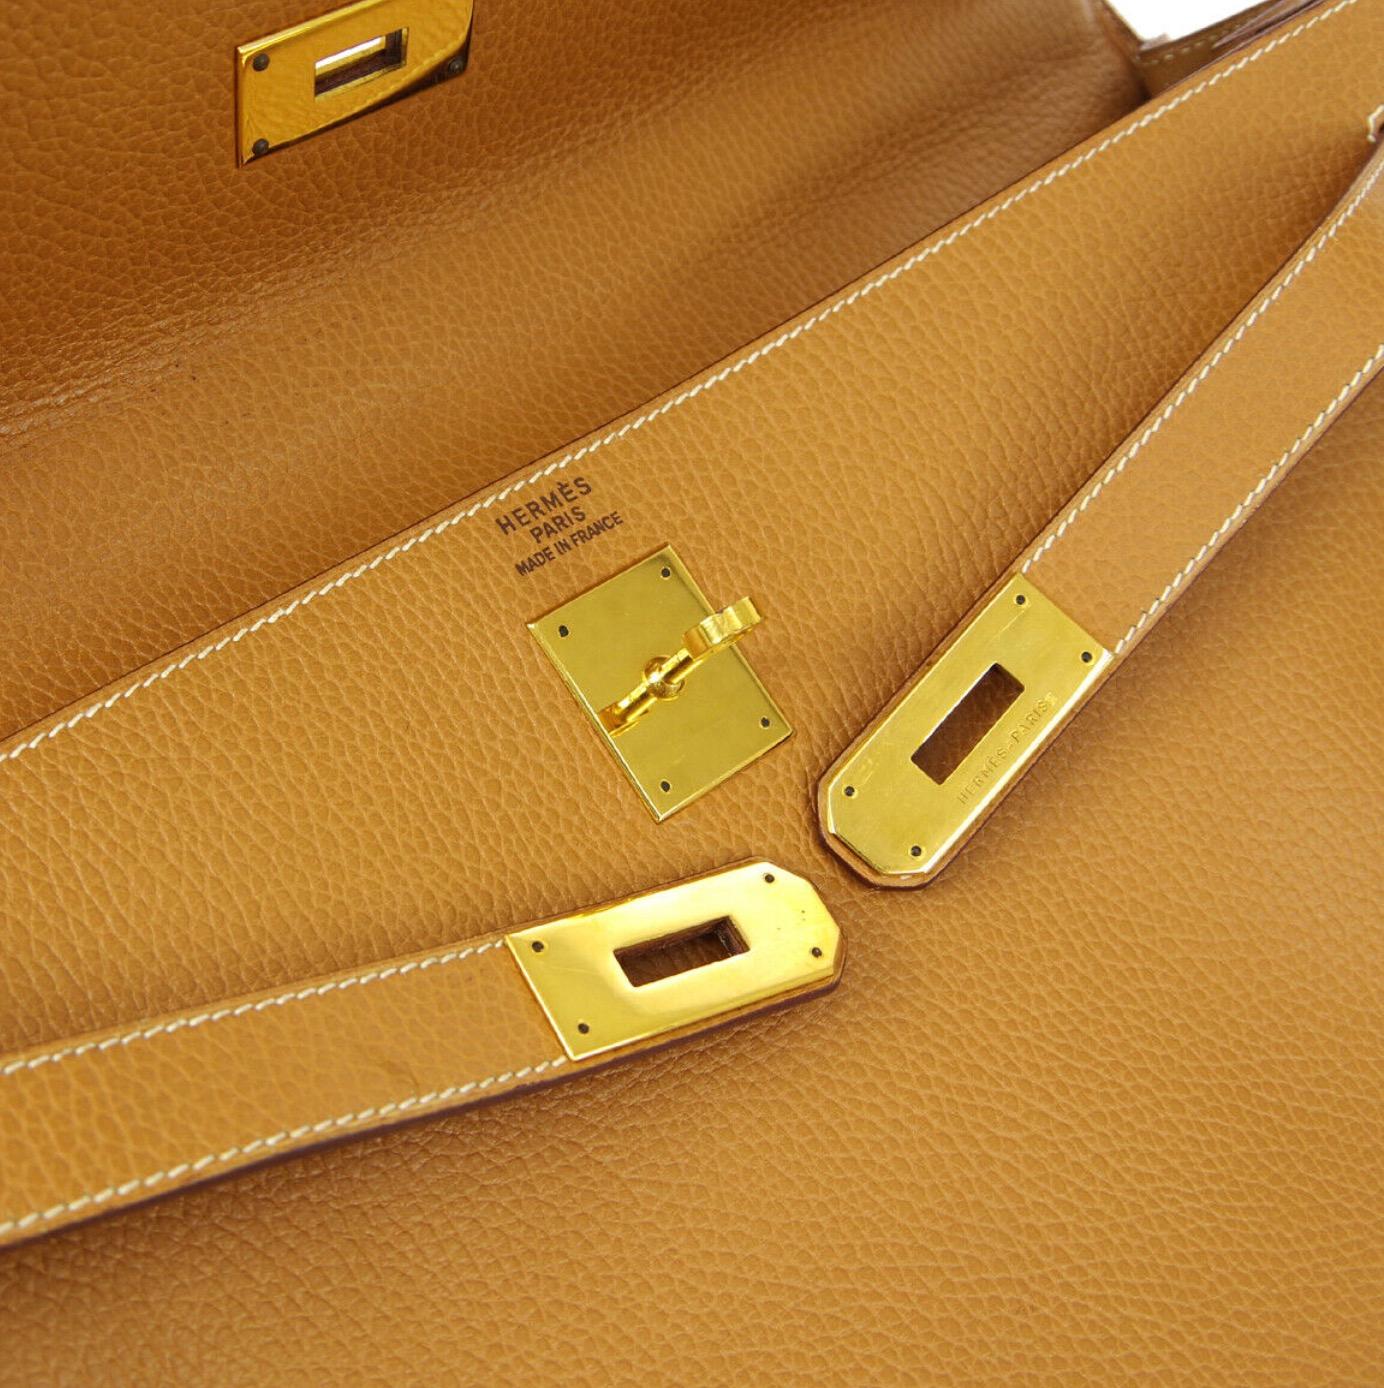 Hermes Kelly 40 Mustard Leather Men's Women's Top Handle Satchel Carryall Tote Bag

Leather
Gold tone hardware
Leather lining
Made in France
Handle drop 4